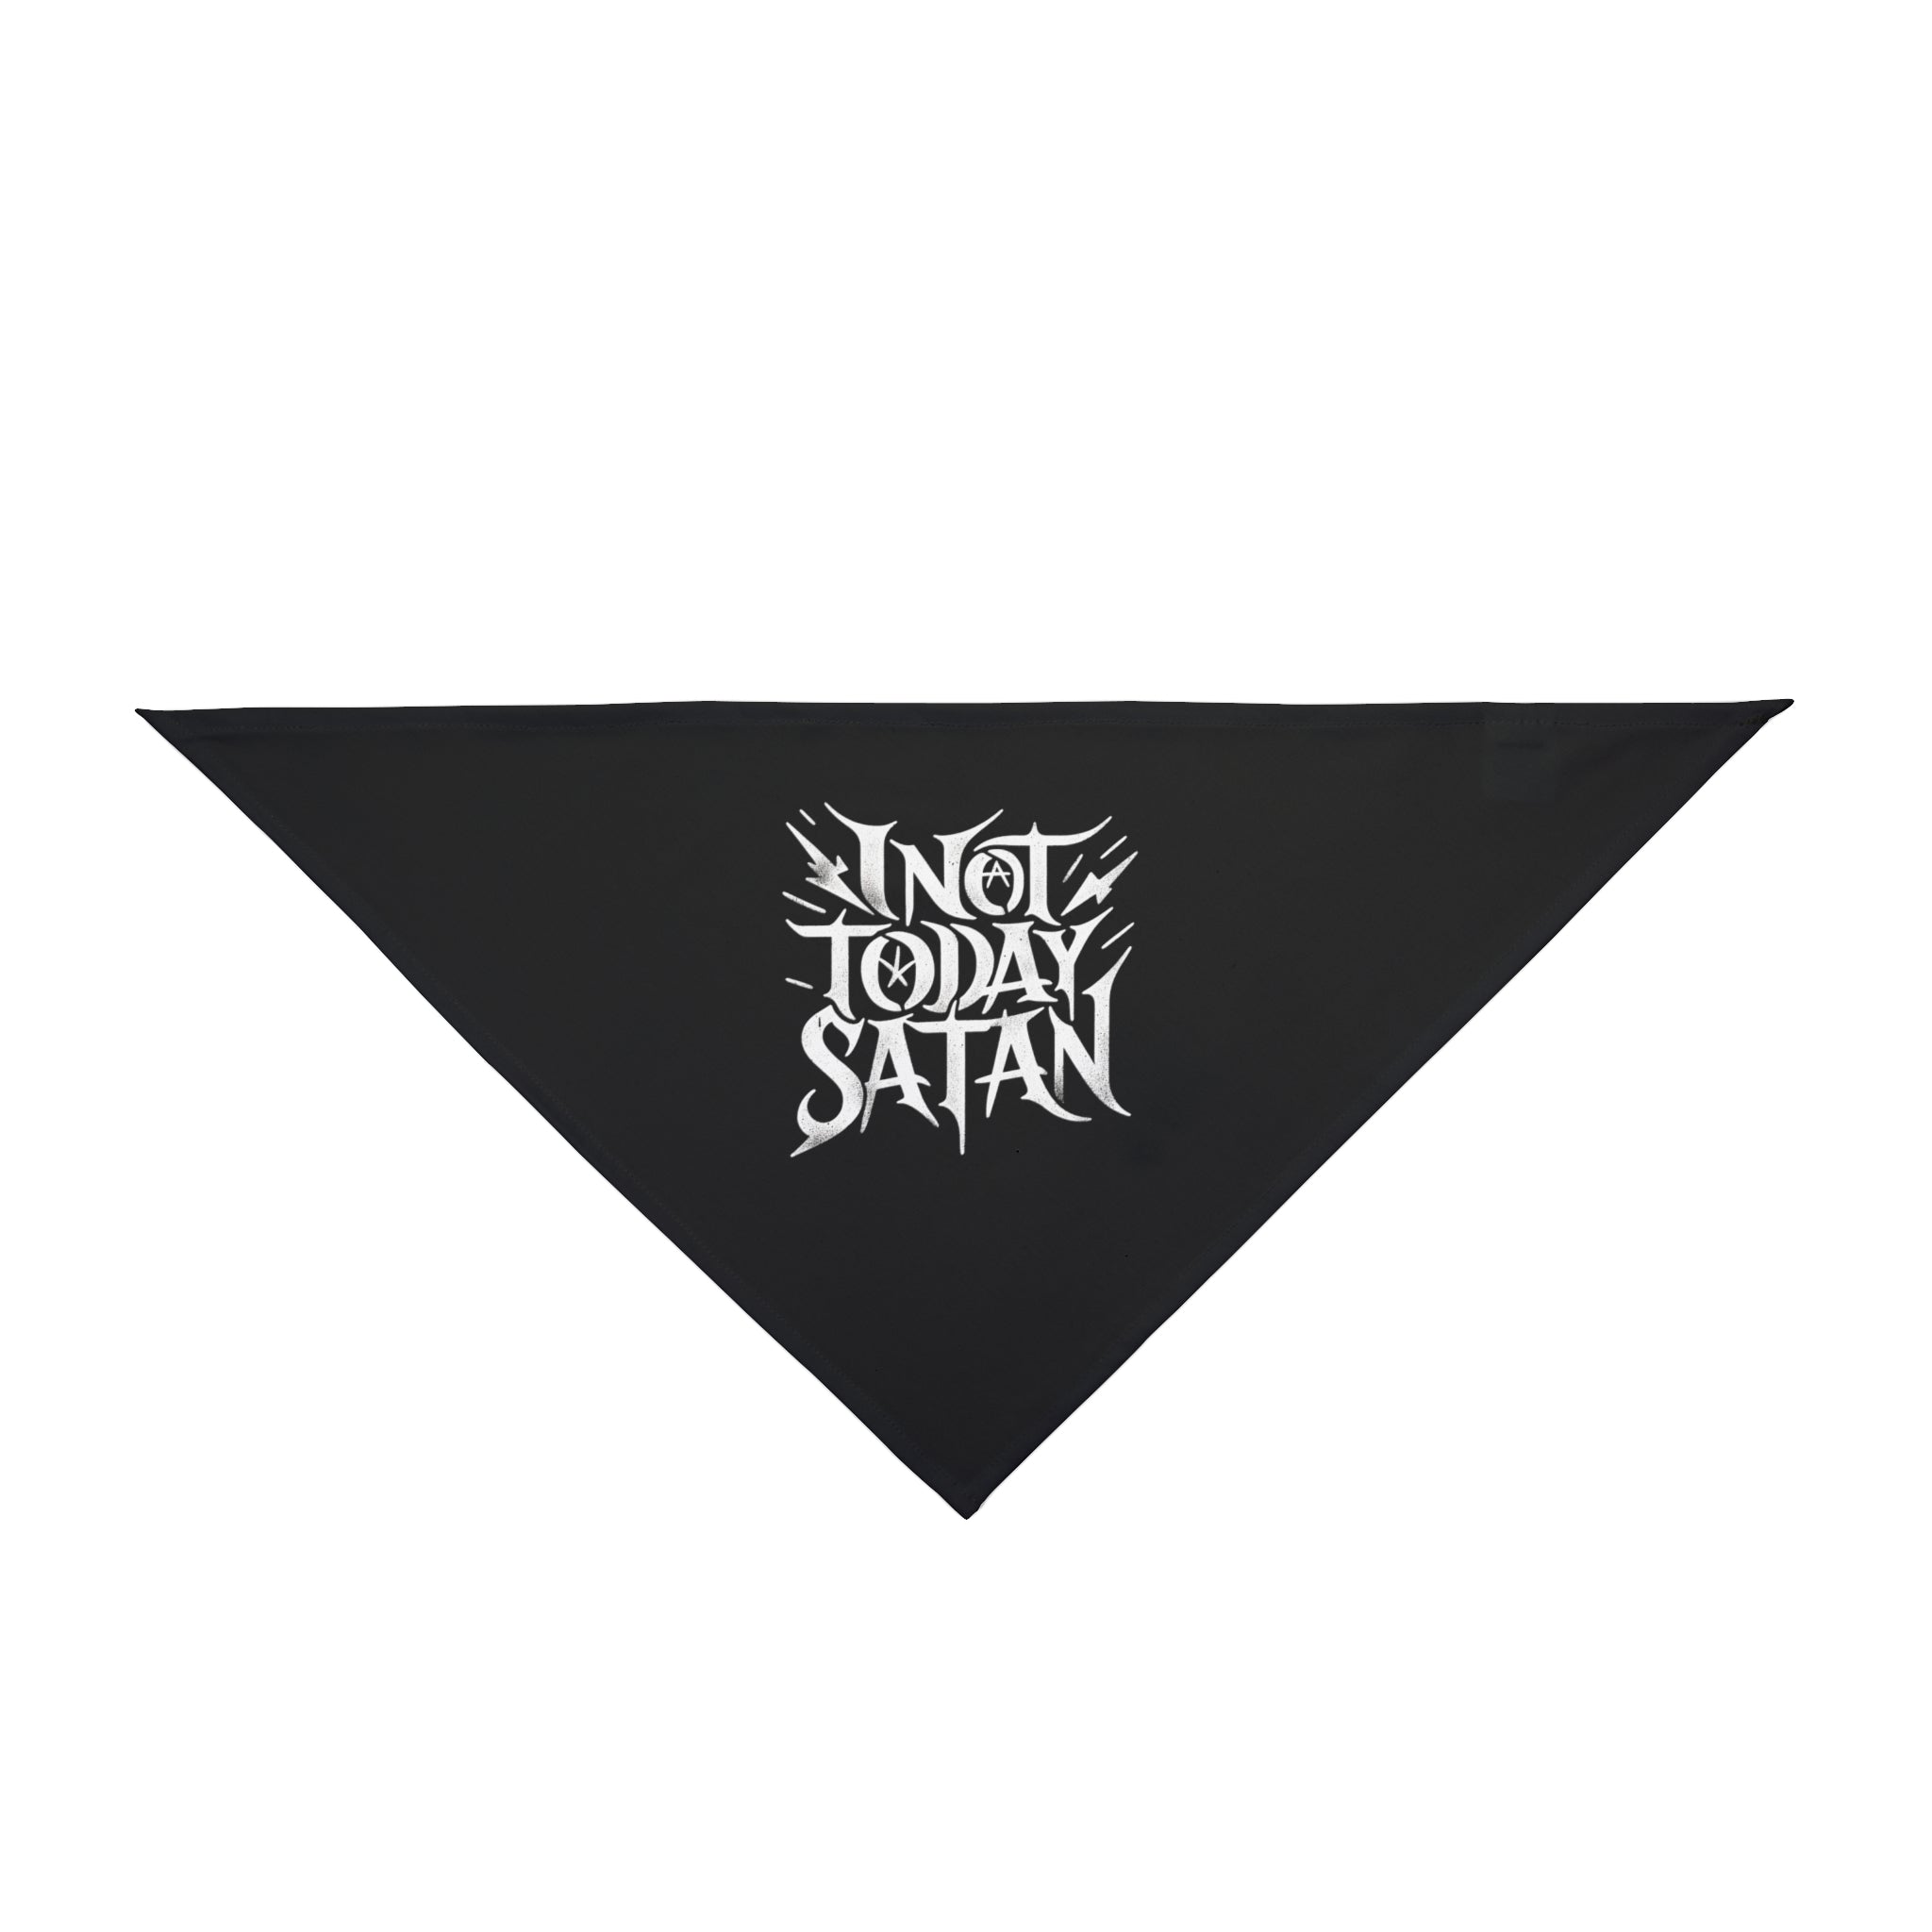 A Not Today Satan - Pet Bandana made from soft-spun polyester with white text in the center that reads "NOT TODAY SATAN" in a stylized, jagged font. This pet-friendly accessory is perfect for making a bold statement.